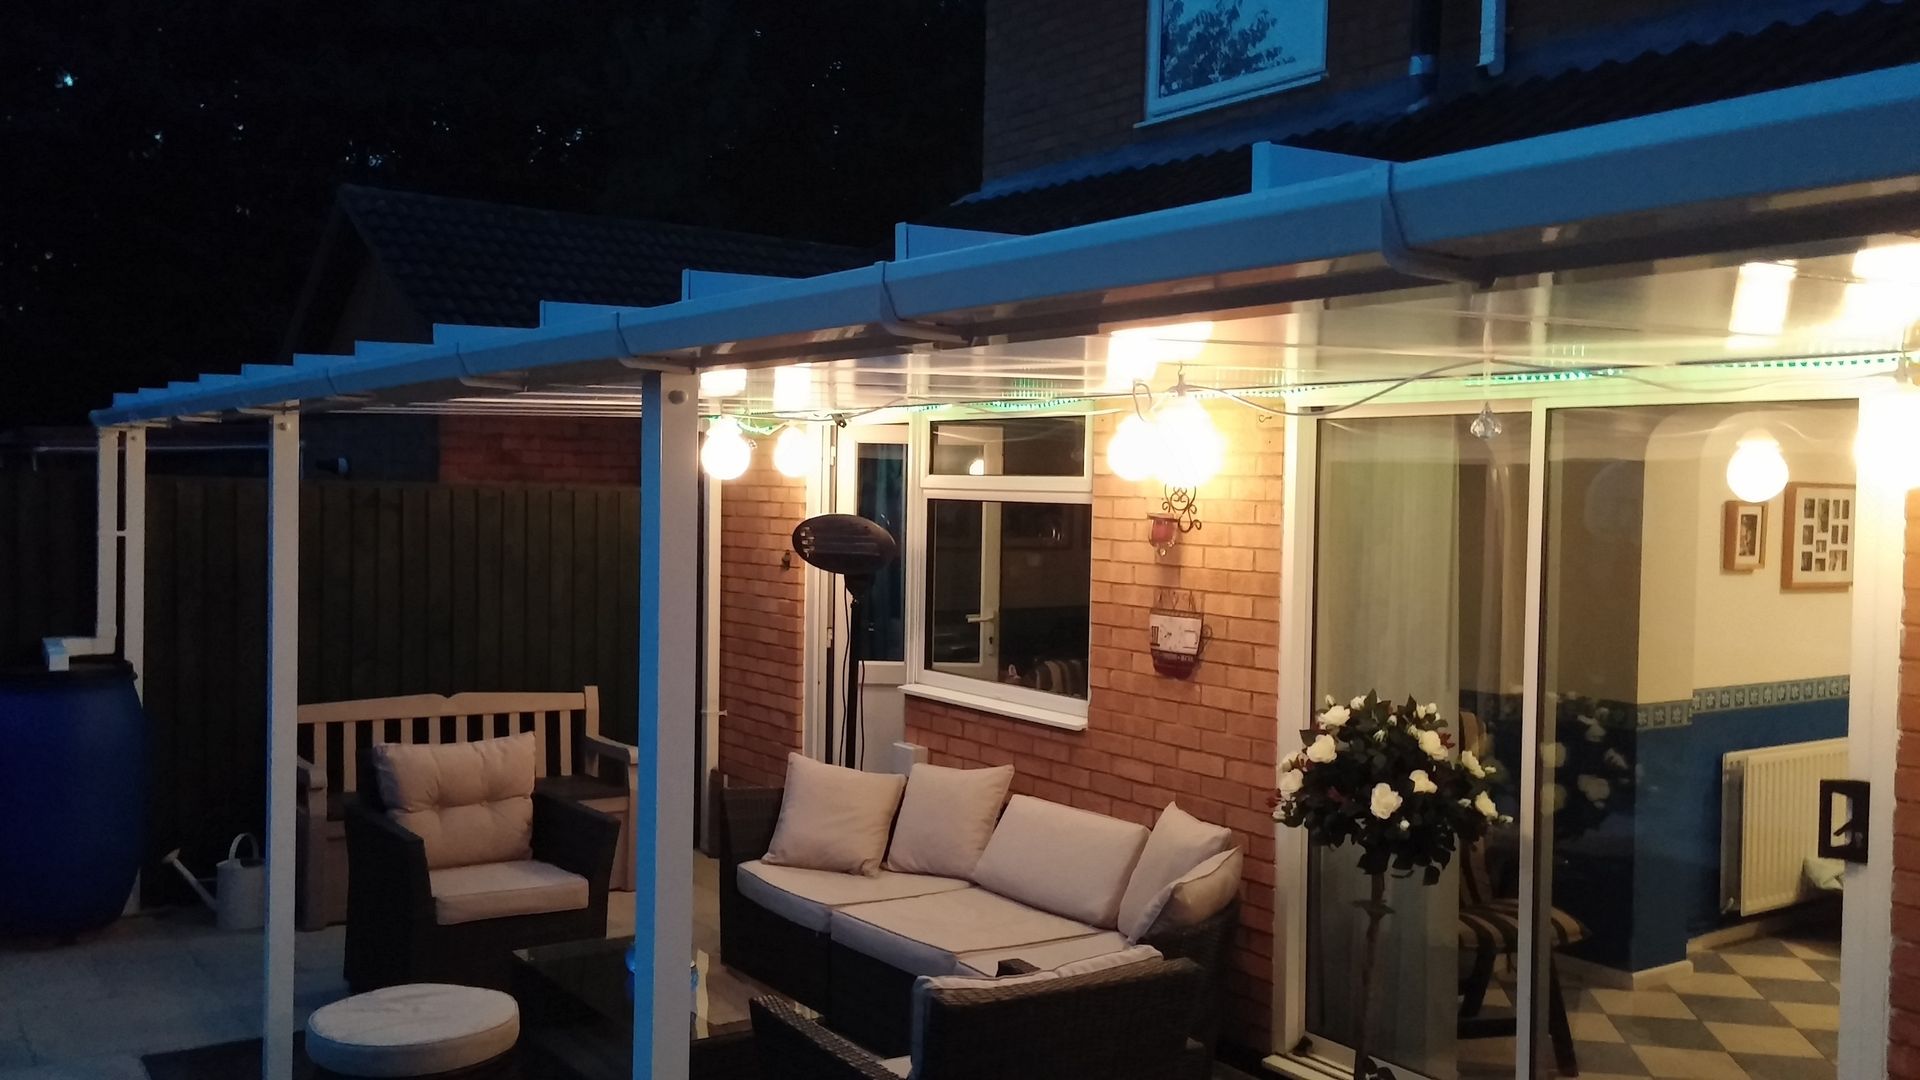 Patio Canopy at night Living Space Patios & Decks